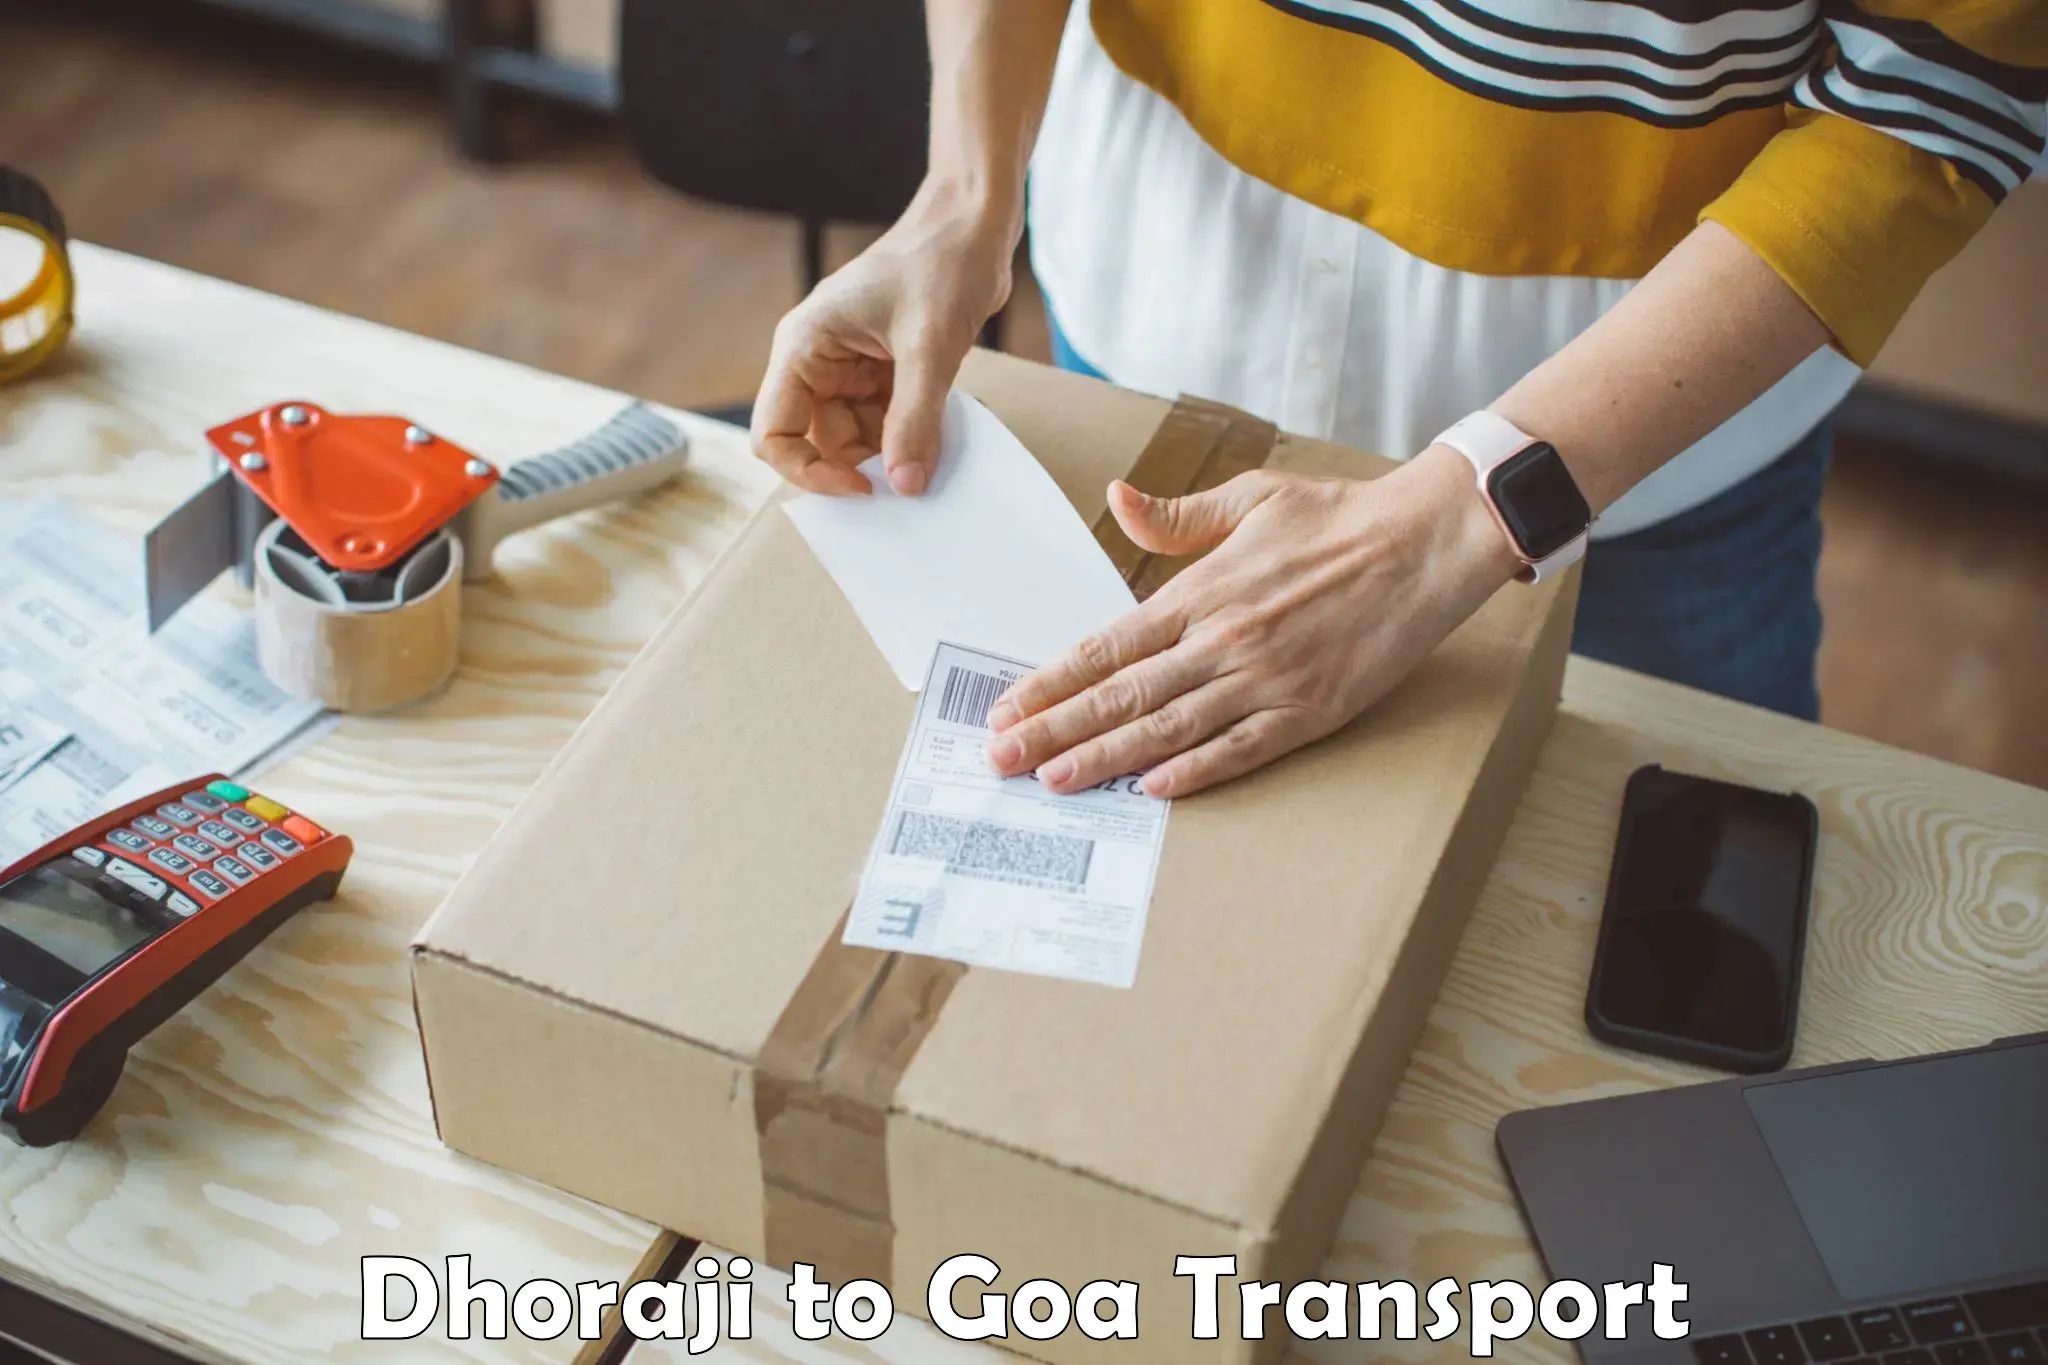 Delivery service Dhoraji to South Goa